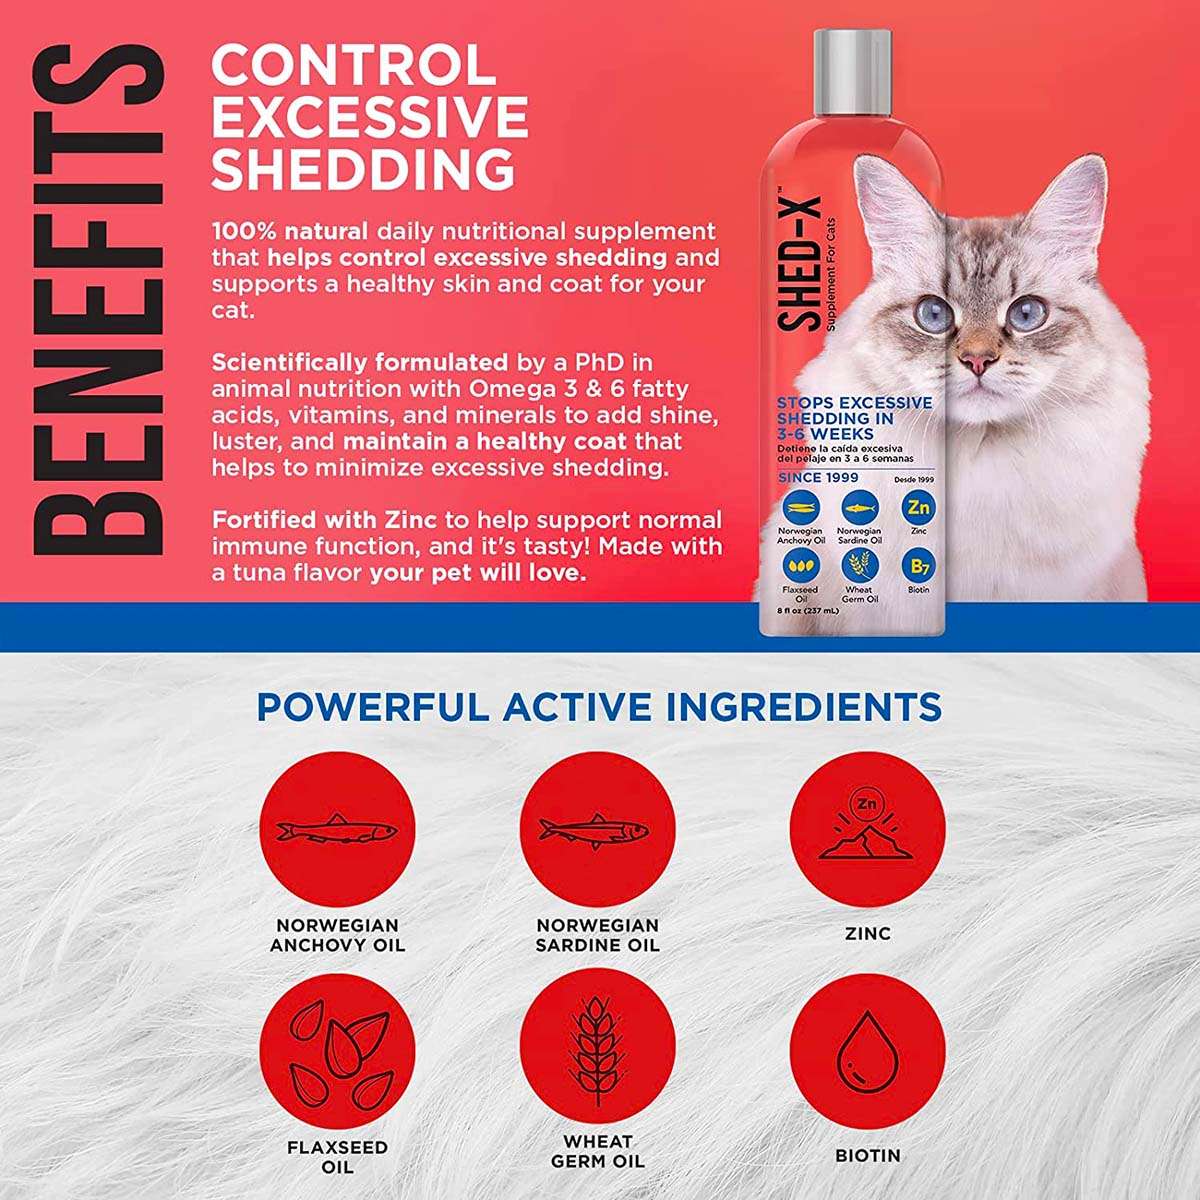 Shed-X is a daily nutritional supplement that helps control excessive shedding